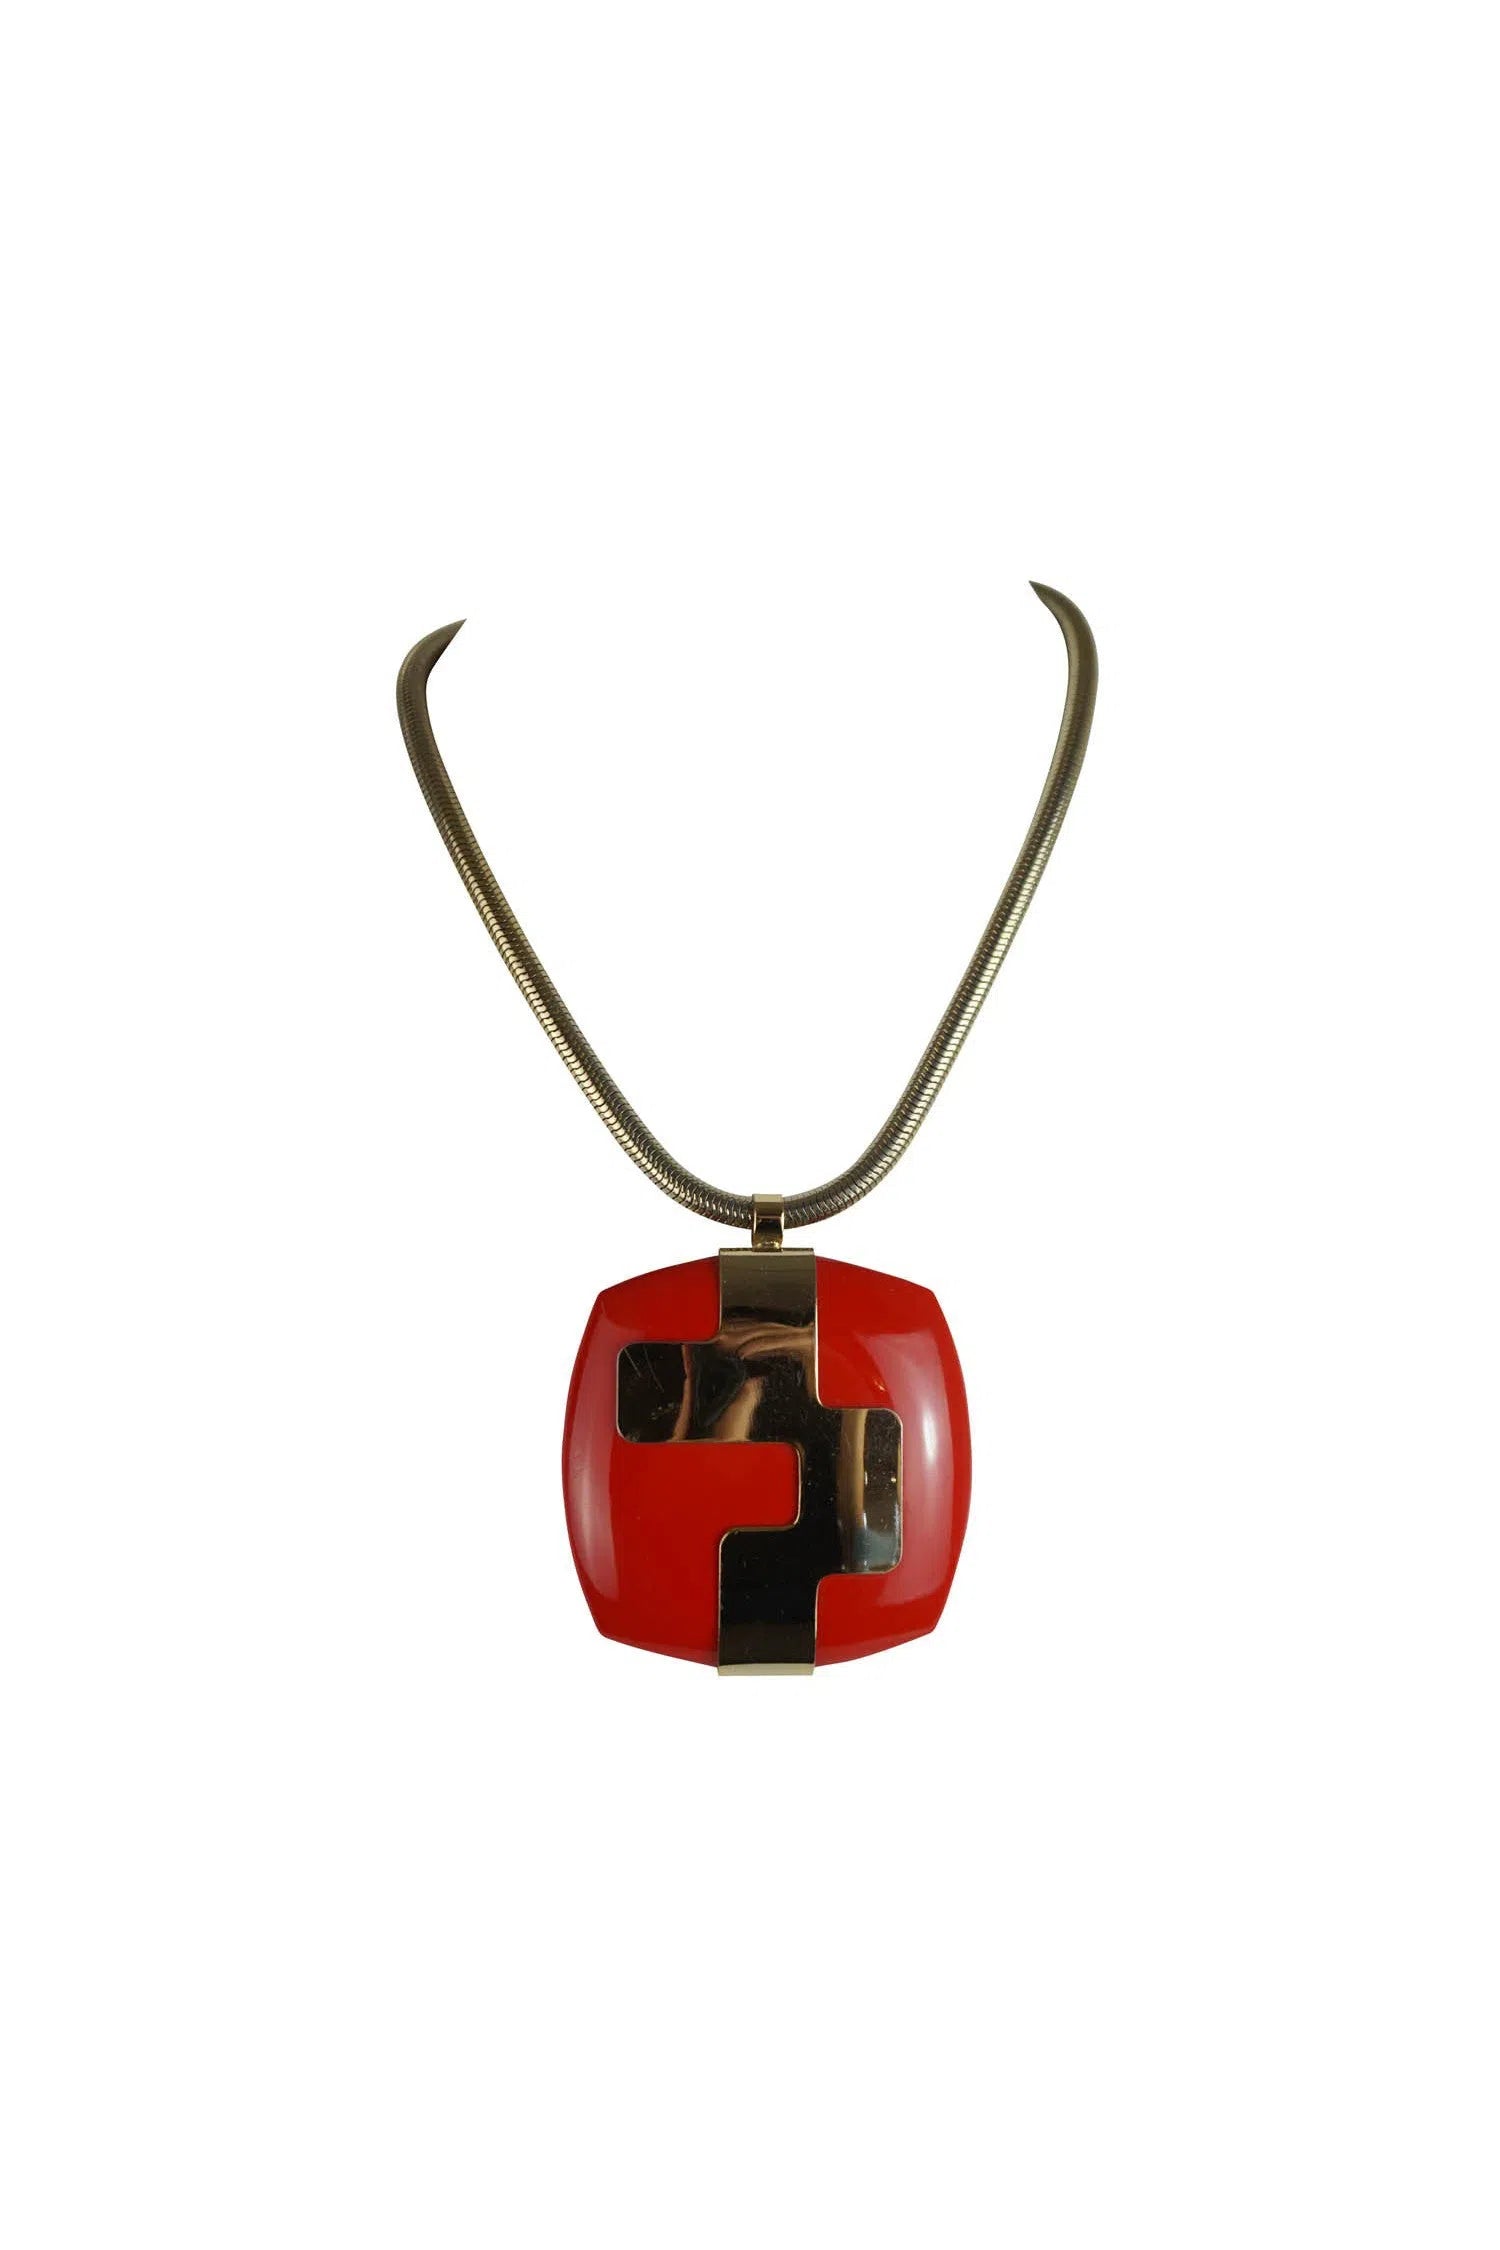 Lanvin Vintage Red and Gold Mod Necklace 1960's